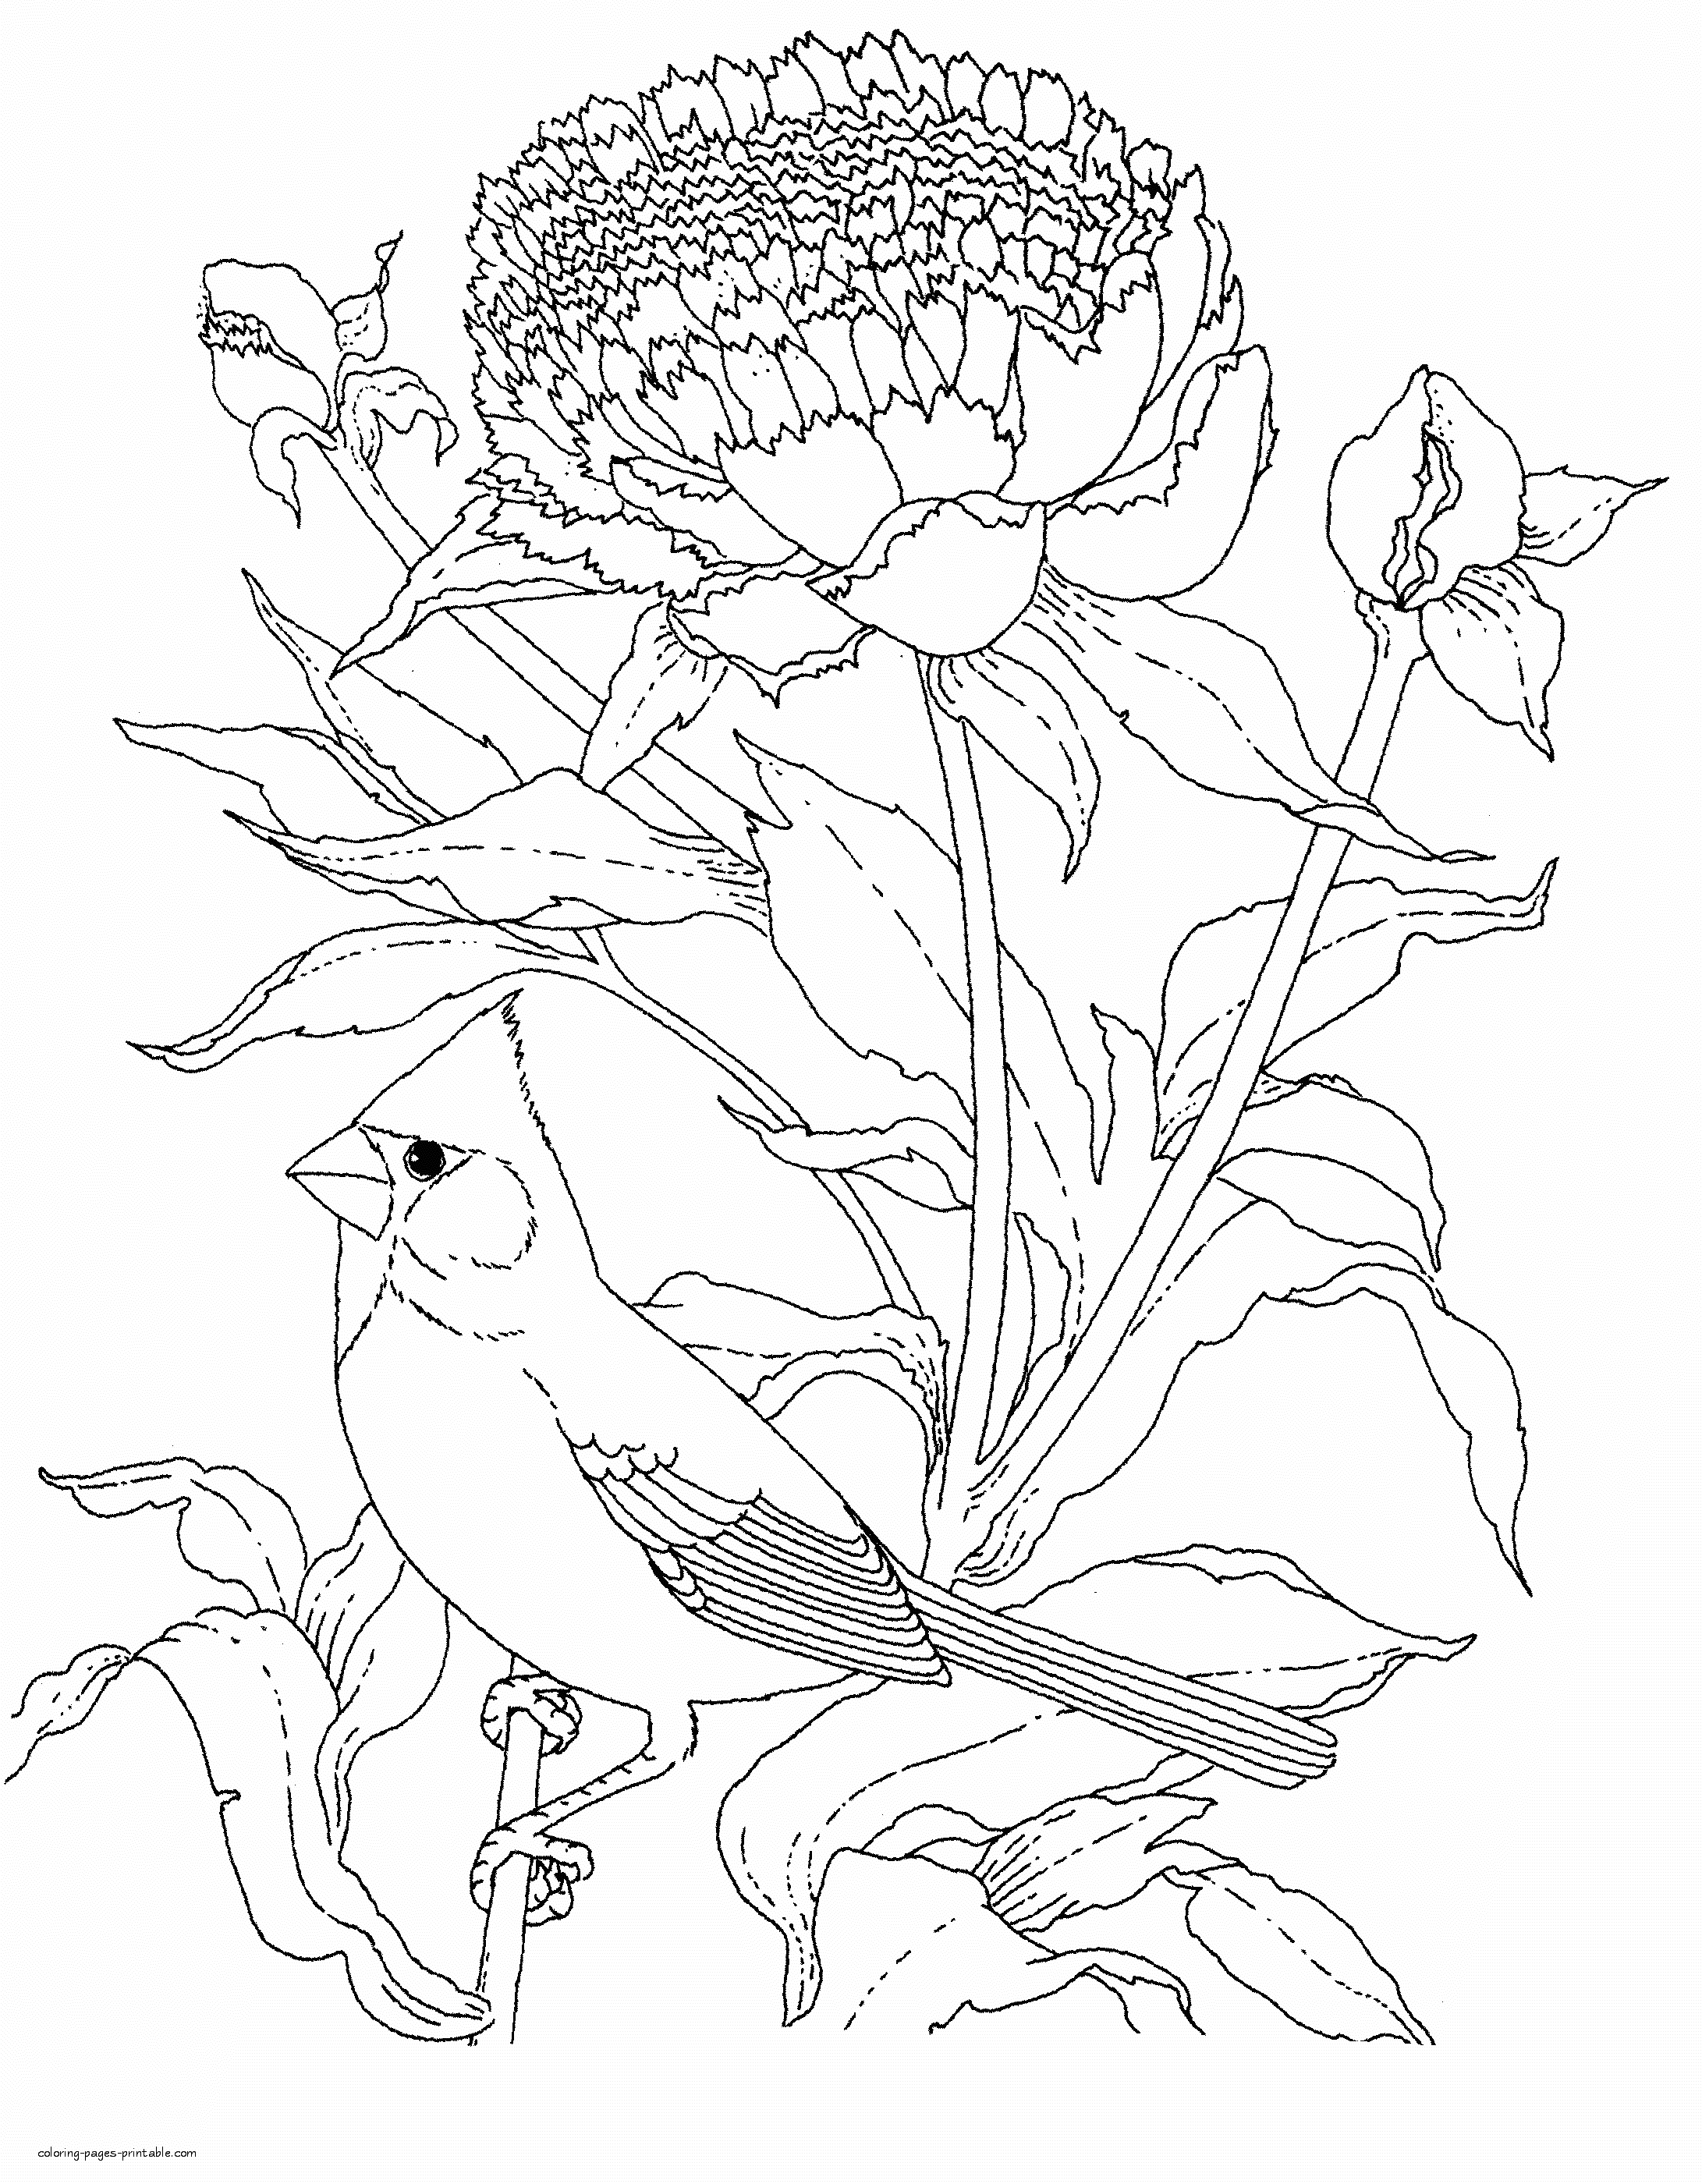 Realistic Birds Coloring Pages For Adults Coloring Pages Printable Com